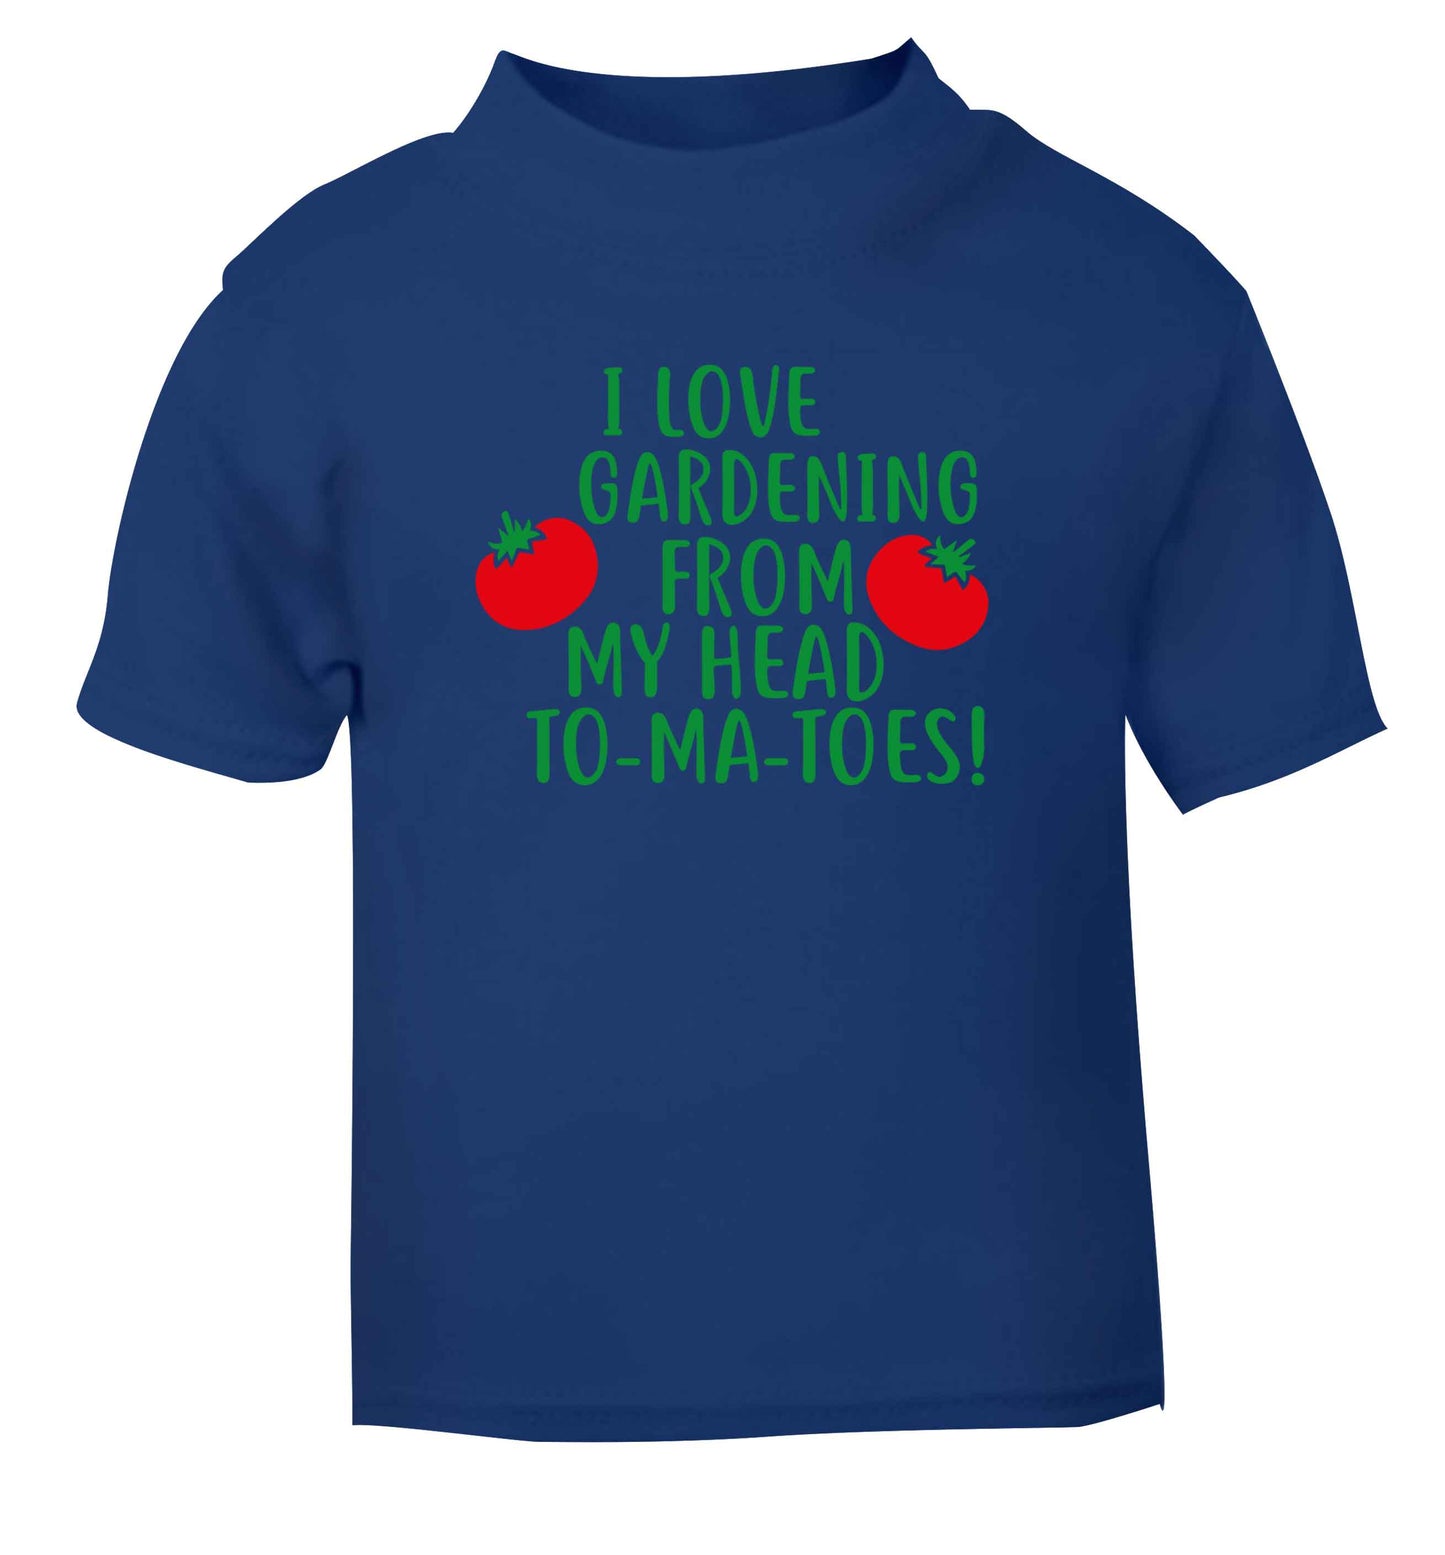 I love gardening from my head to-ma-toes blue Baby Toddler Tshirt 2 Years